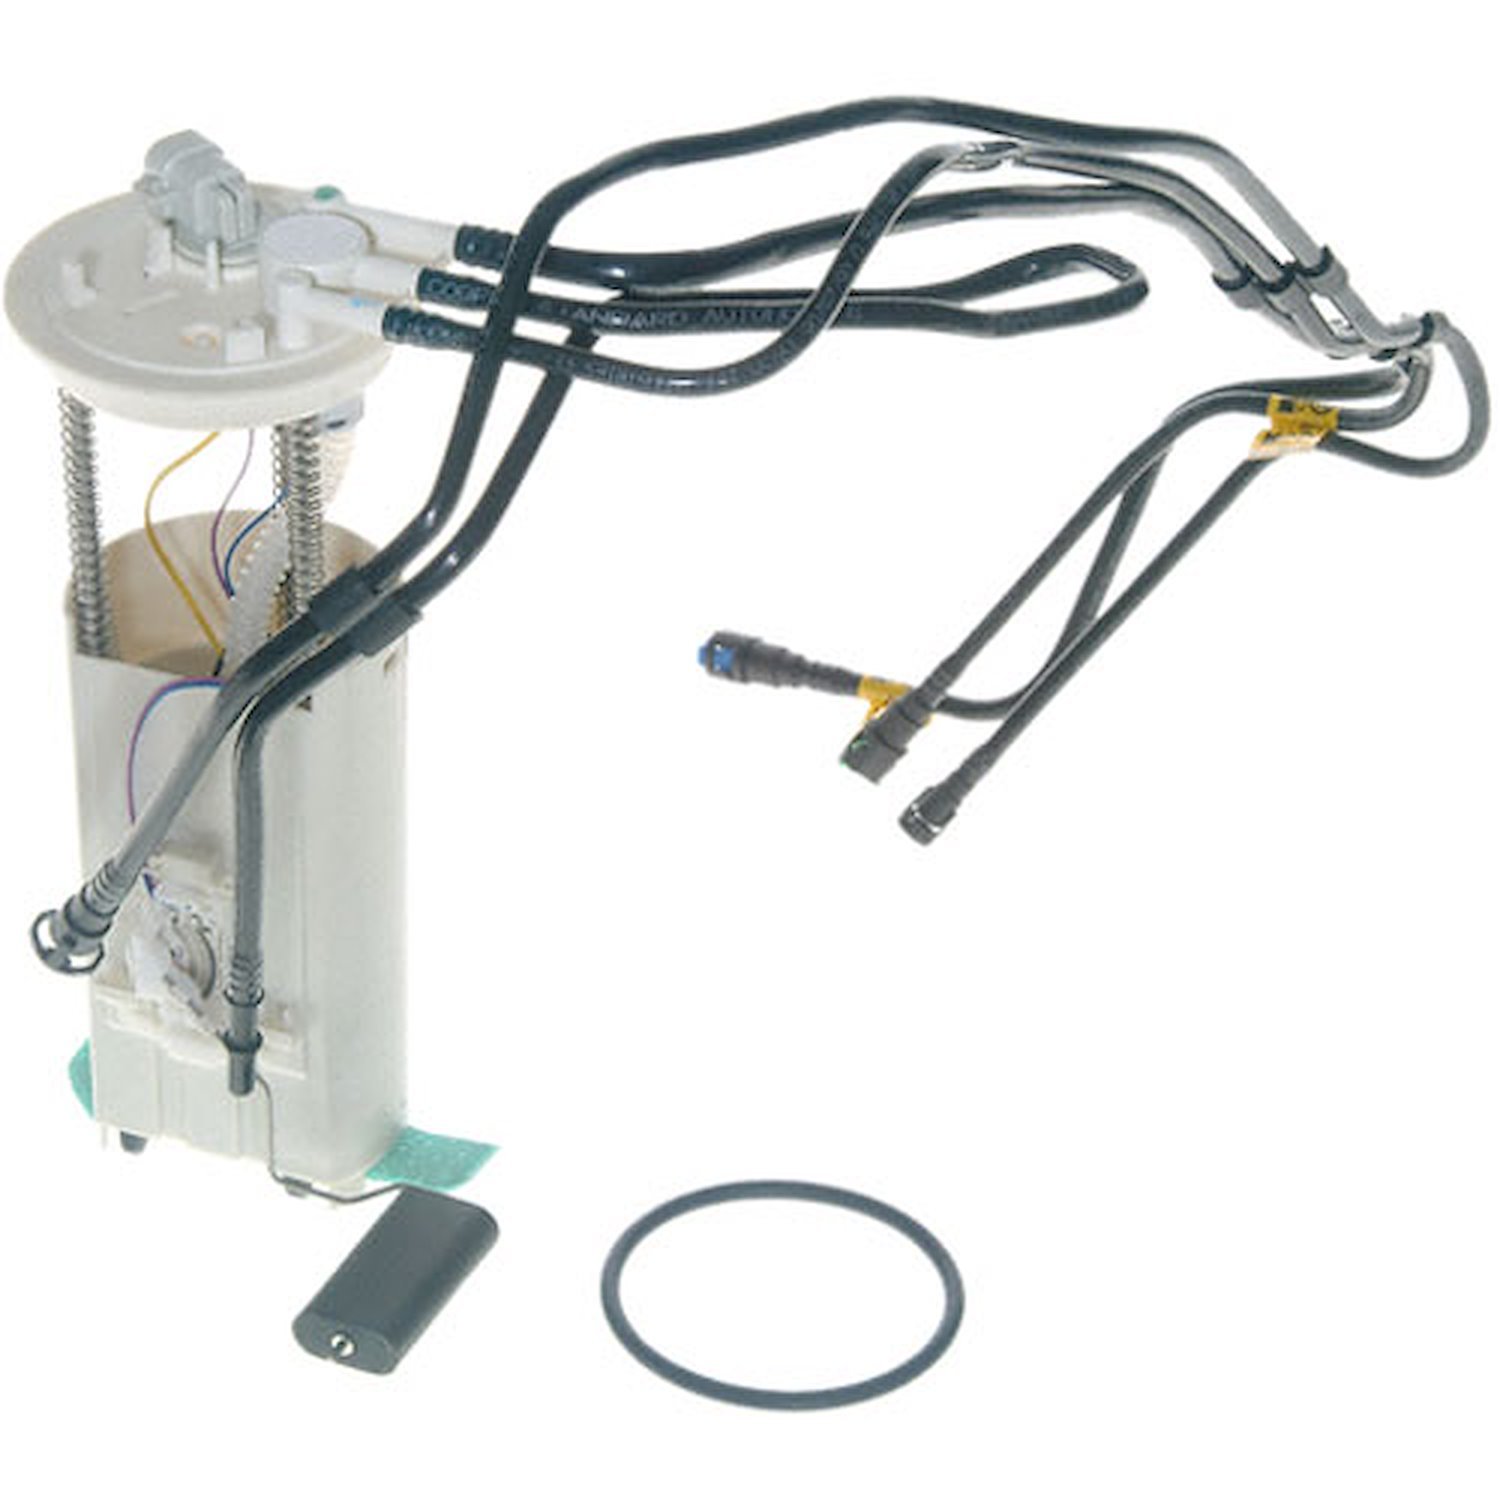 OE GM Replacement Electric Fuel Pump Module Assembly 1997 Chevrolet Lumina/Monte Carlo 3.4L V6